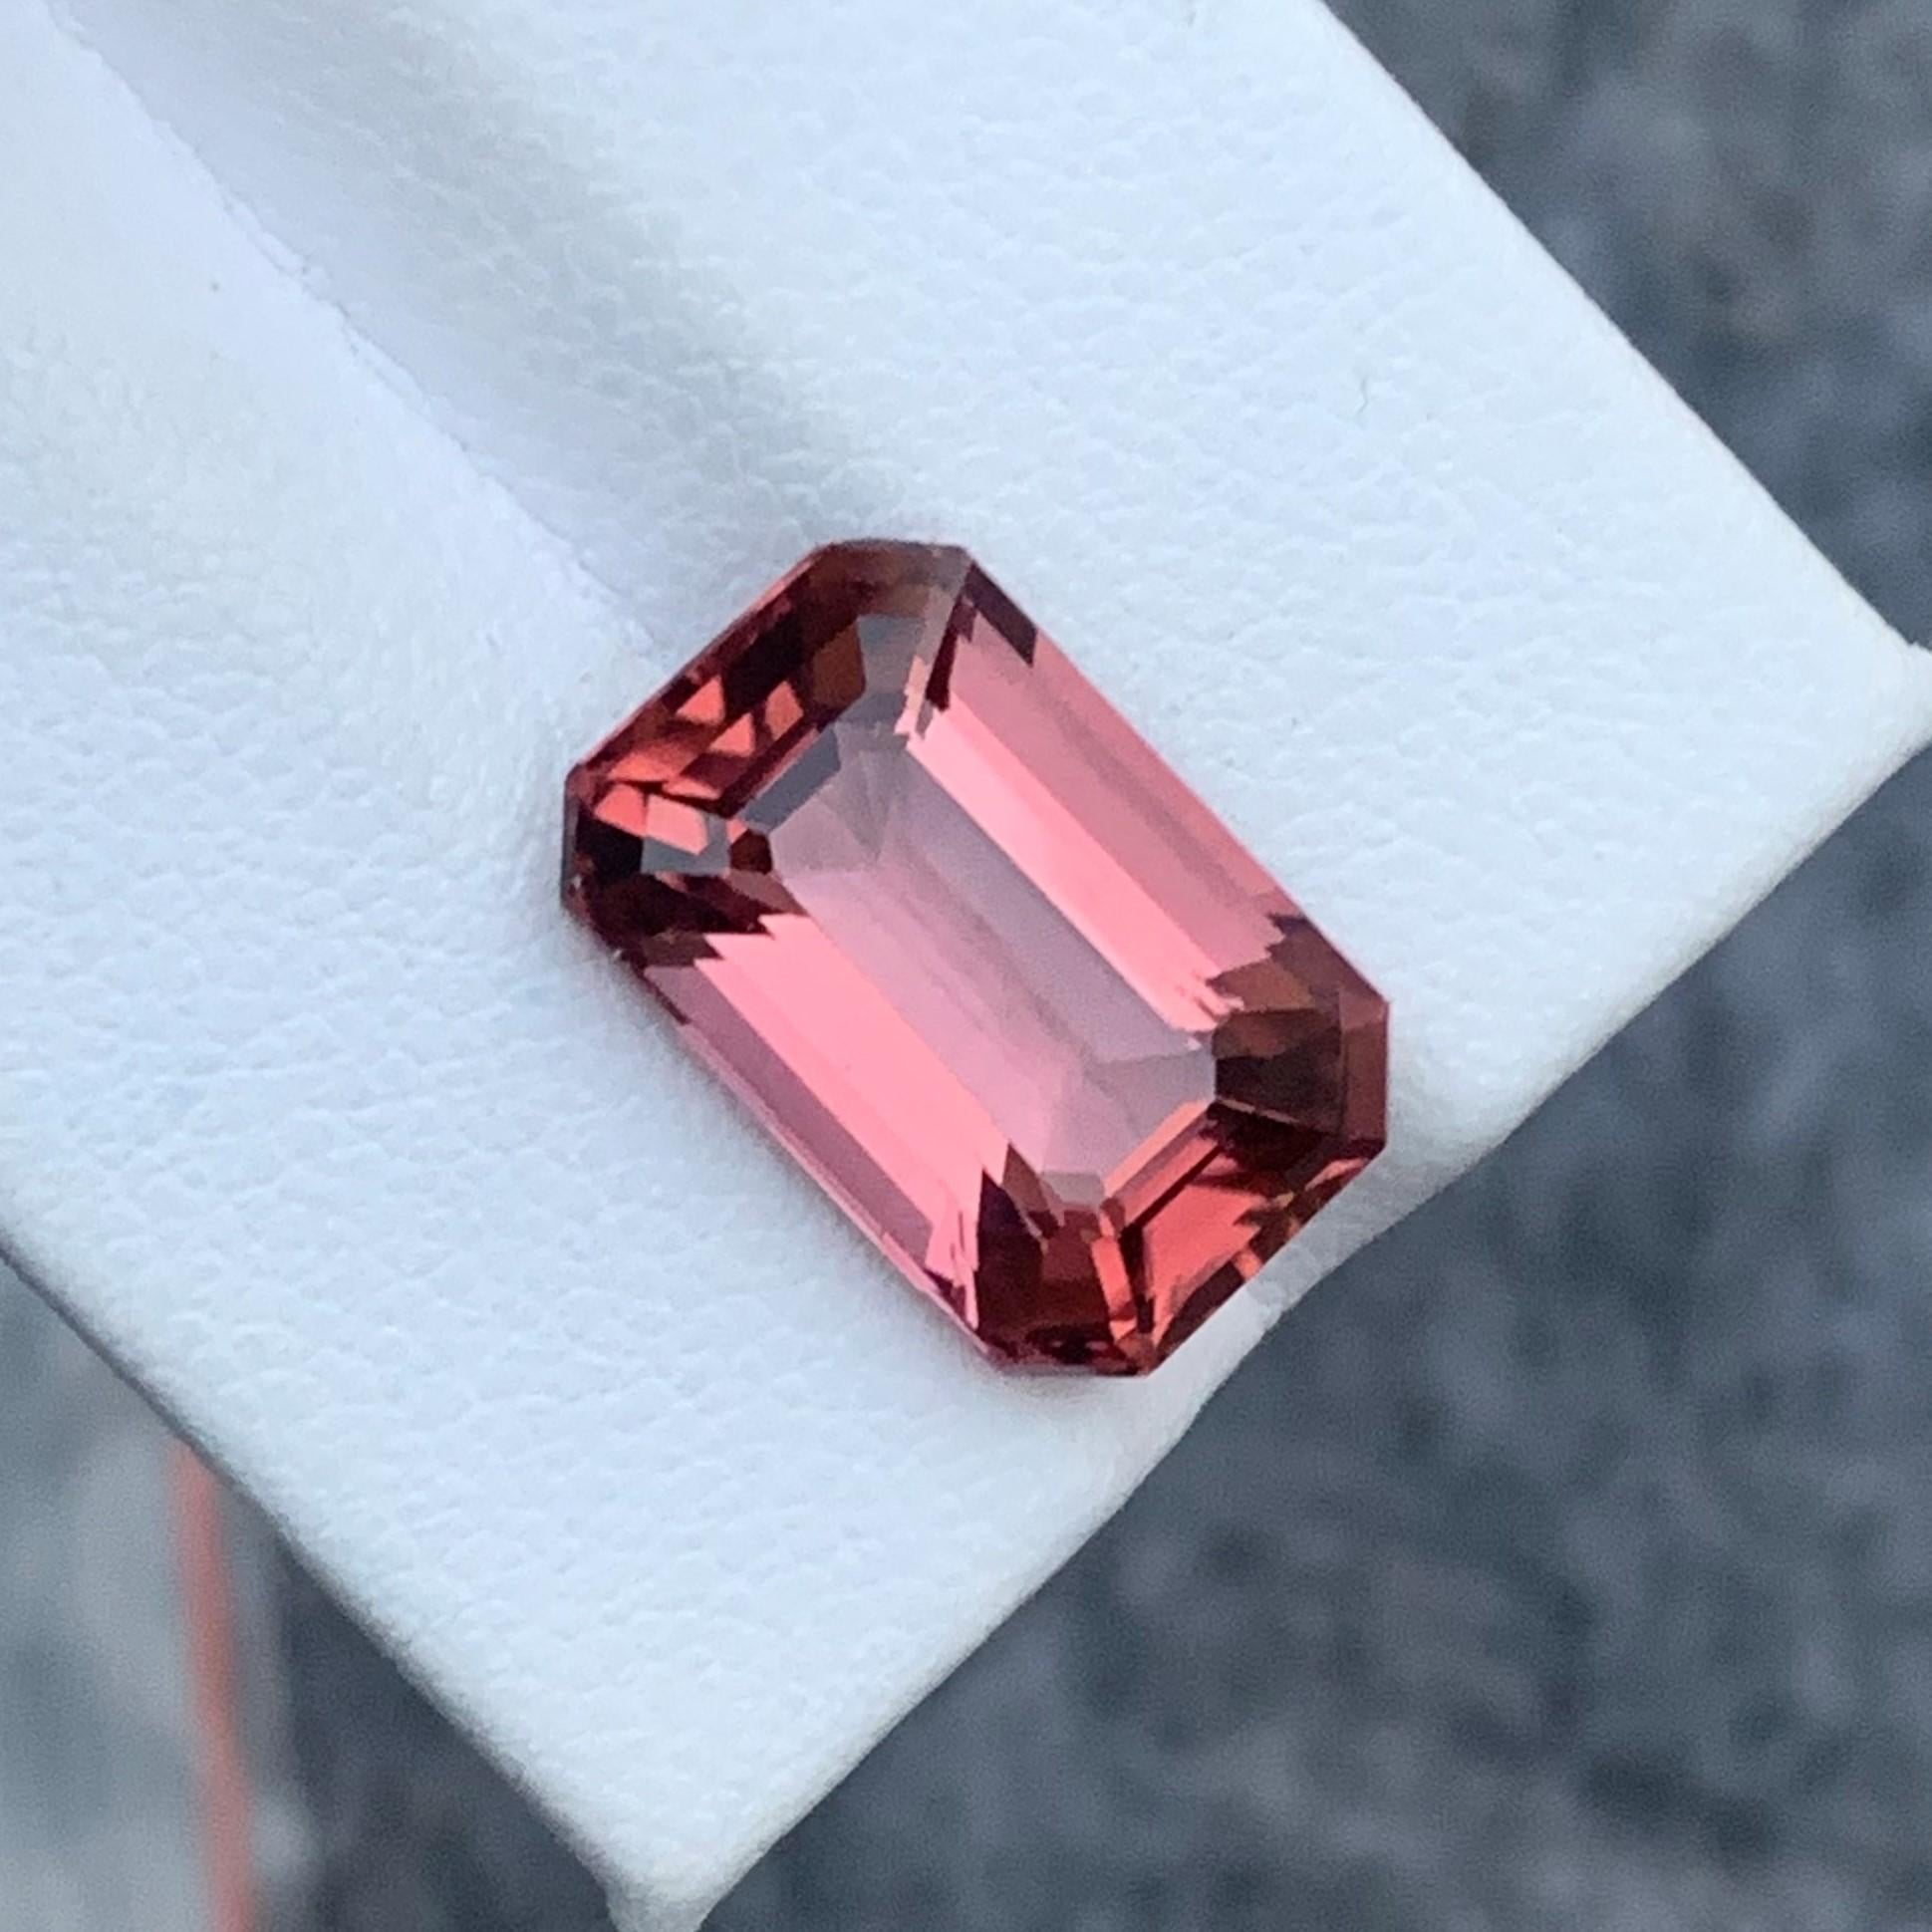 9.0 Carat AAA Quality Loose Soft Pink Tourmaline Emerald Cut From Afghanistan 4